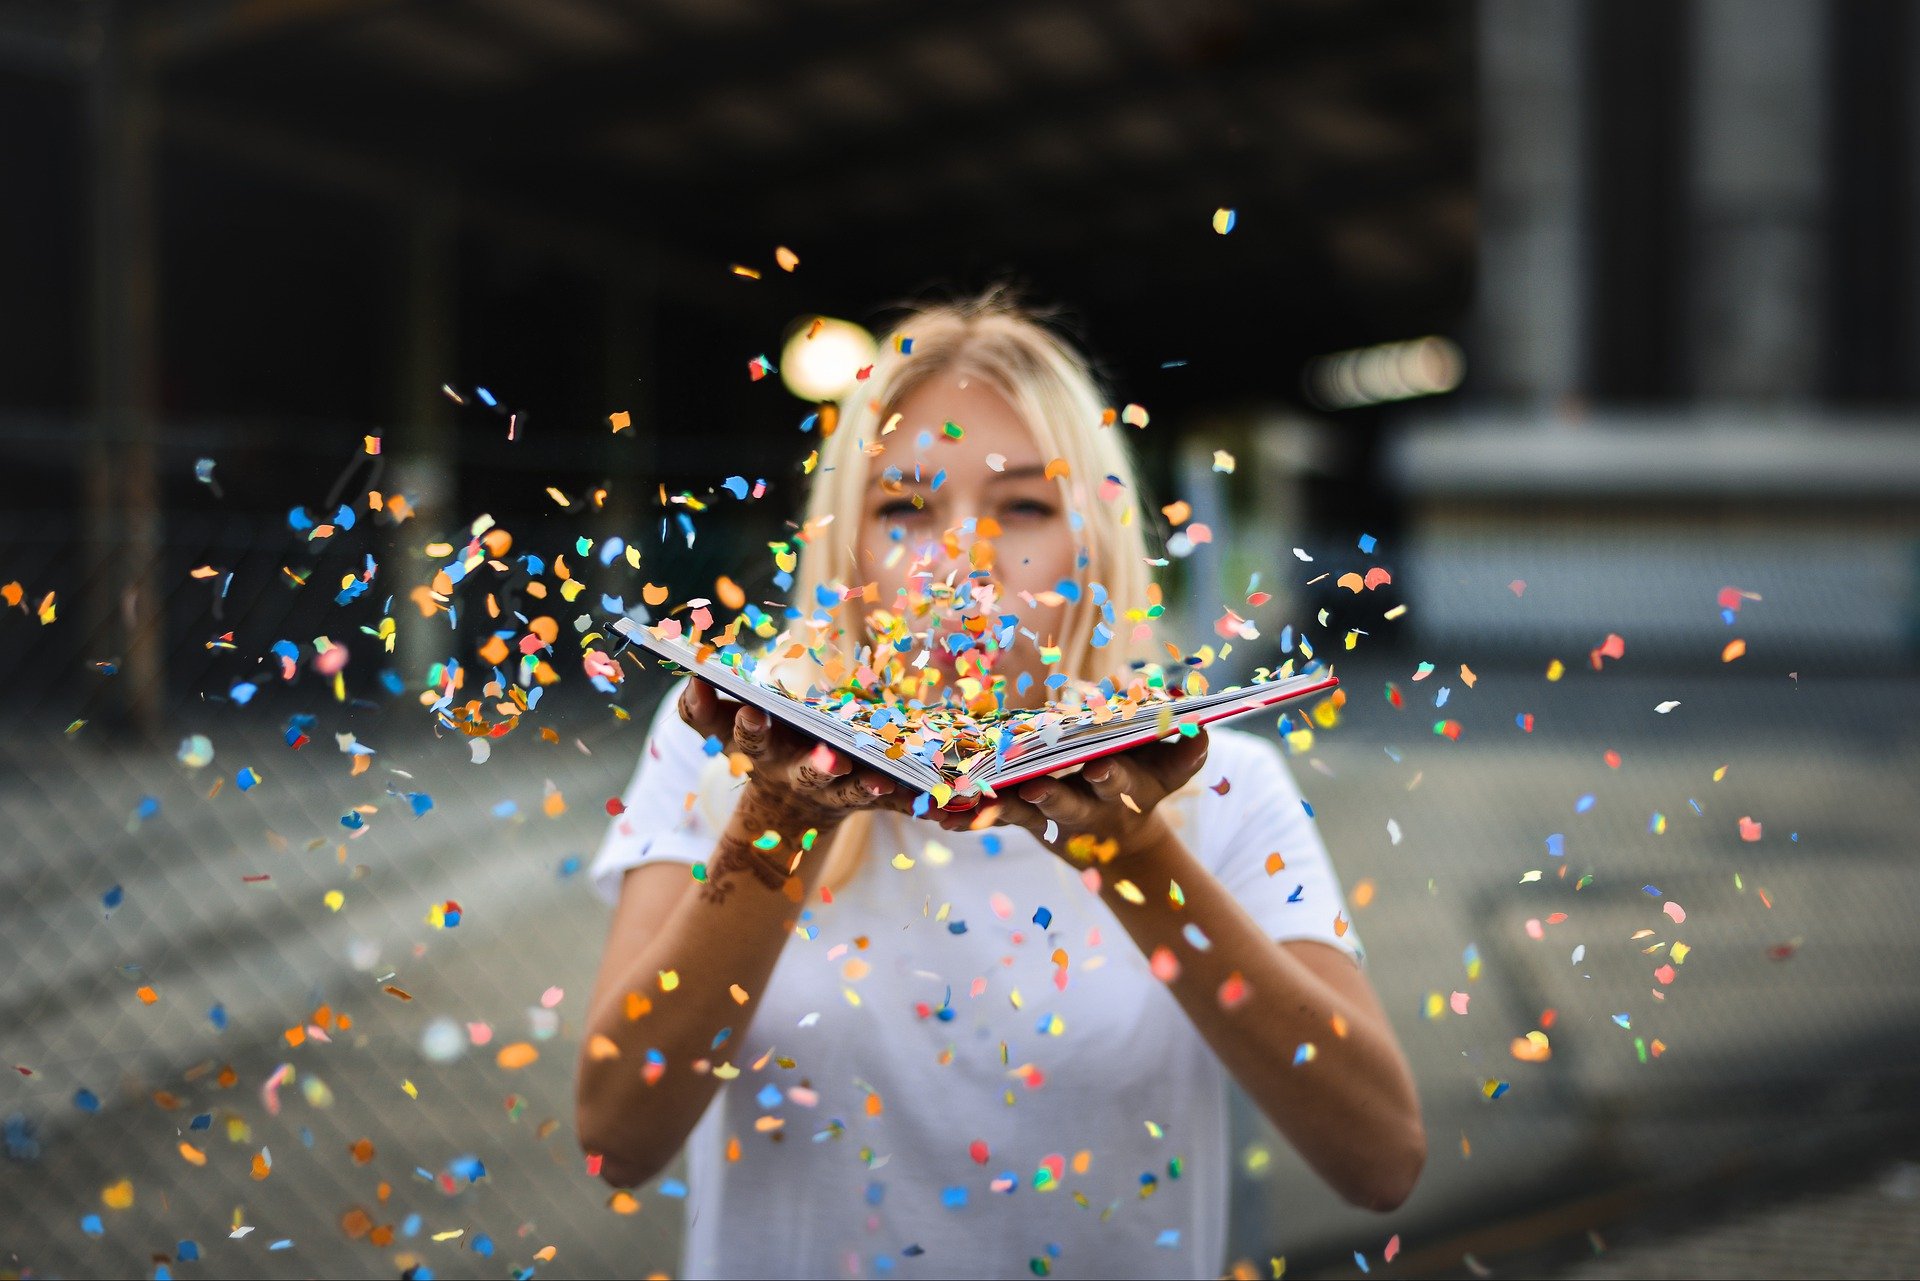 woman blowing a bunch of confetti from the pages of a book symbolizes the notion of flexibility of viewpoint - no one point is the 'truth'